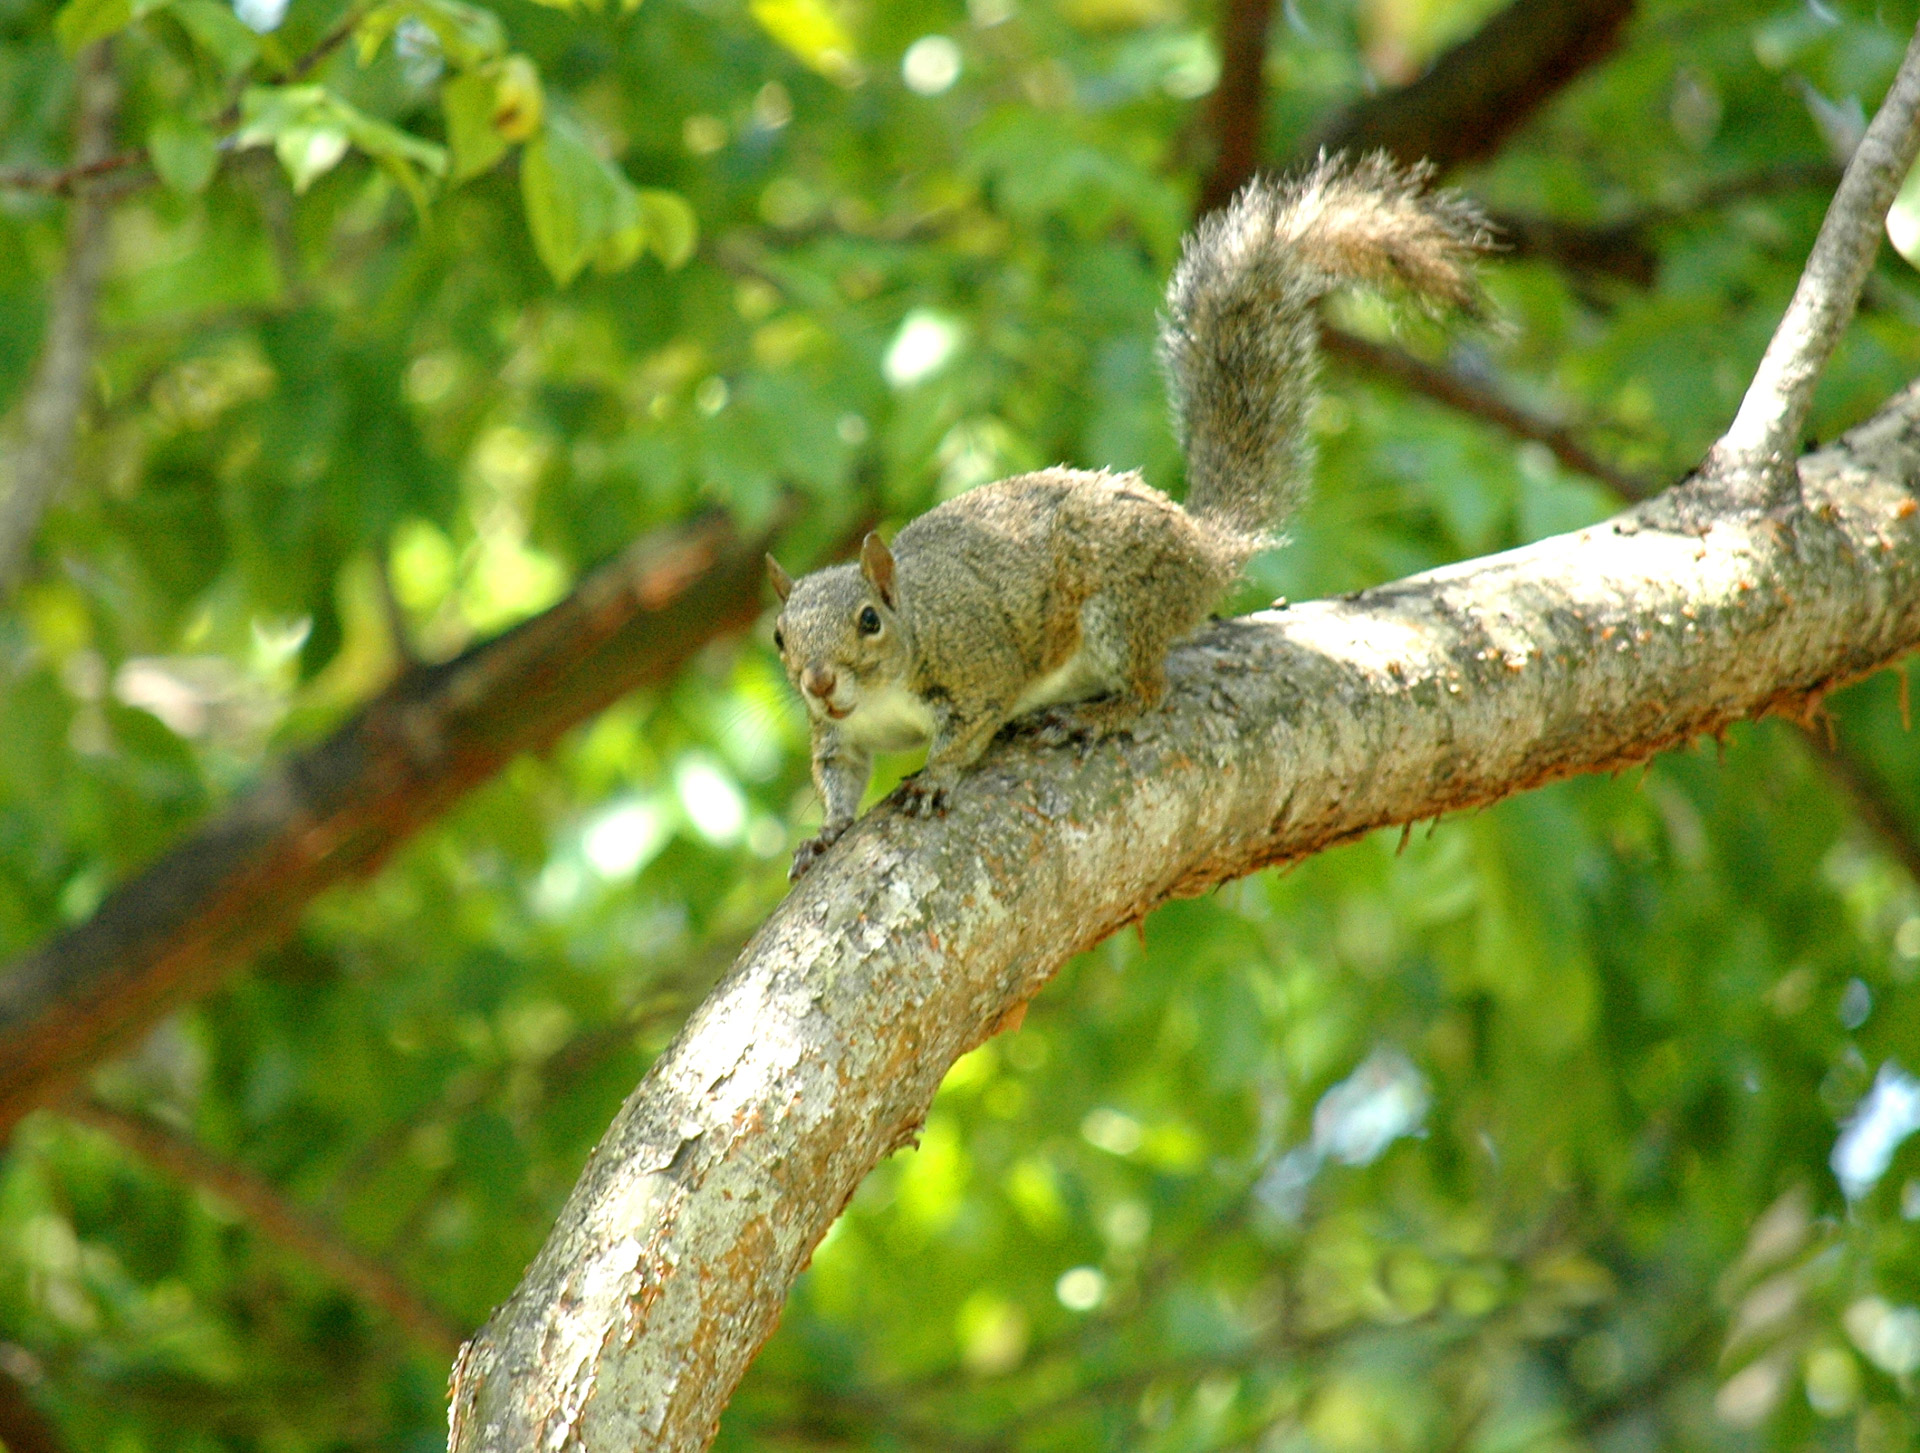 A squirrel resting on a tree branch.